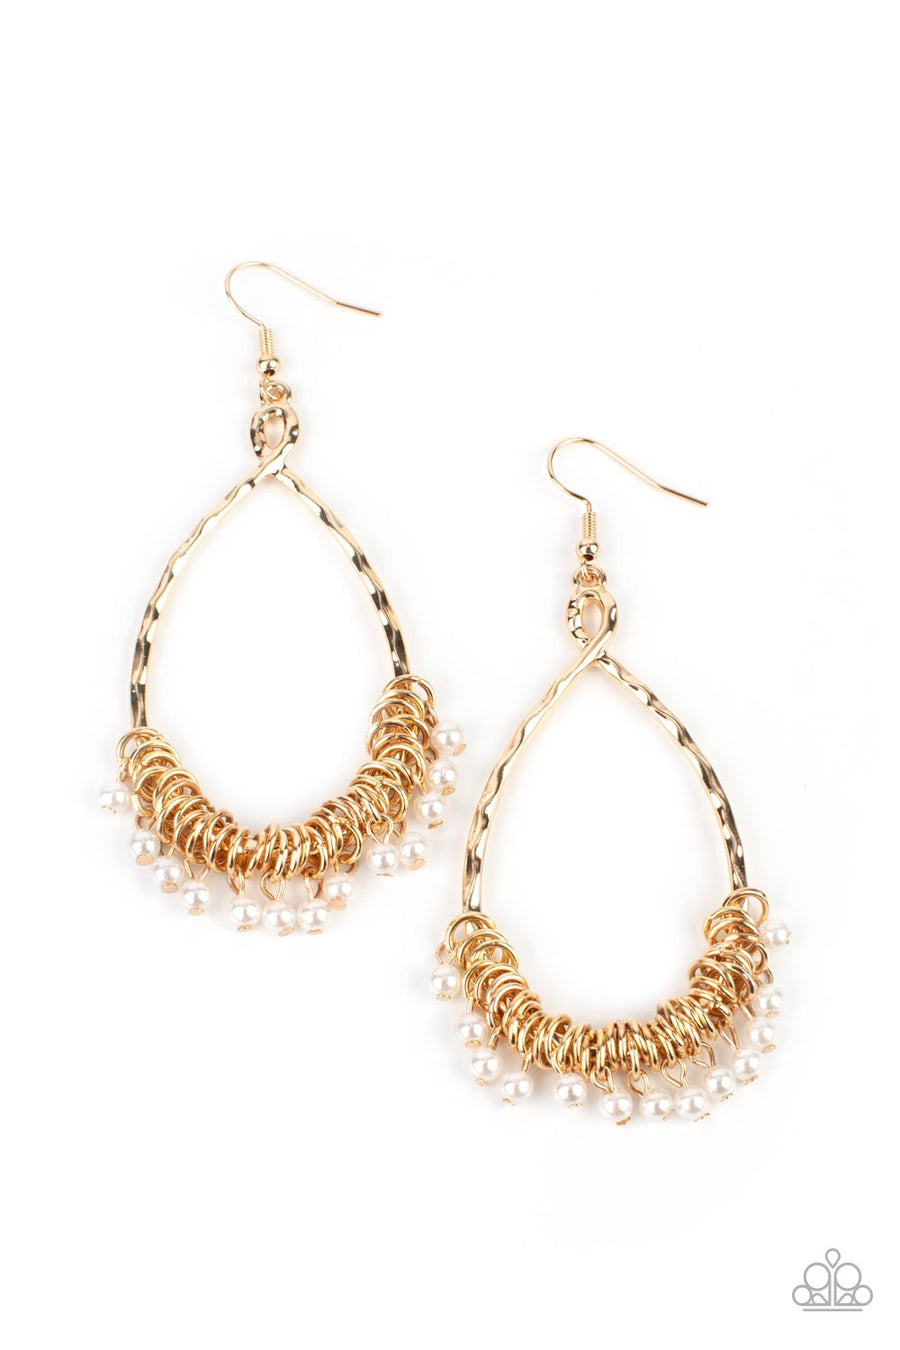 Wishing Well Wonder - Gold Earrings - Paparazzi Accessories - Oversized and delicately hammered, gold teardrop hoops feature a display of dainty pearl beads swinging freely from gold rings at the bottom of the frame resulting in a melodic finish. Earring attaches to a standard fishhook fitting. Sold as one pair of earrings.